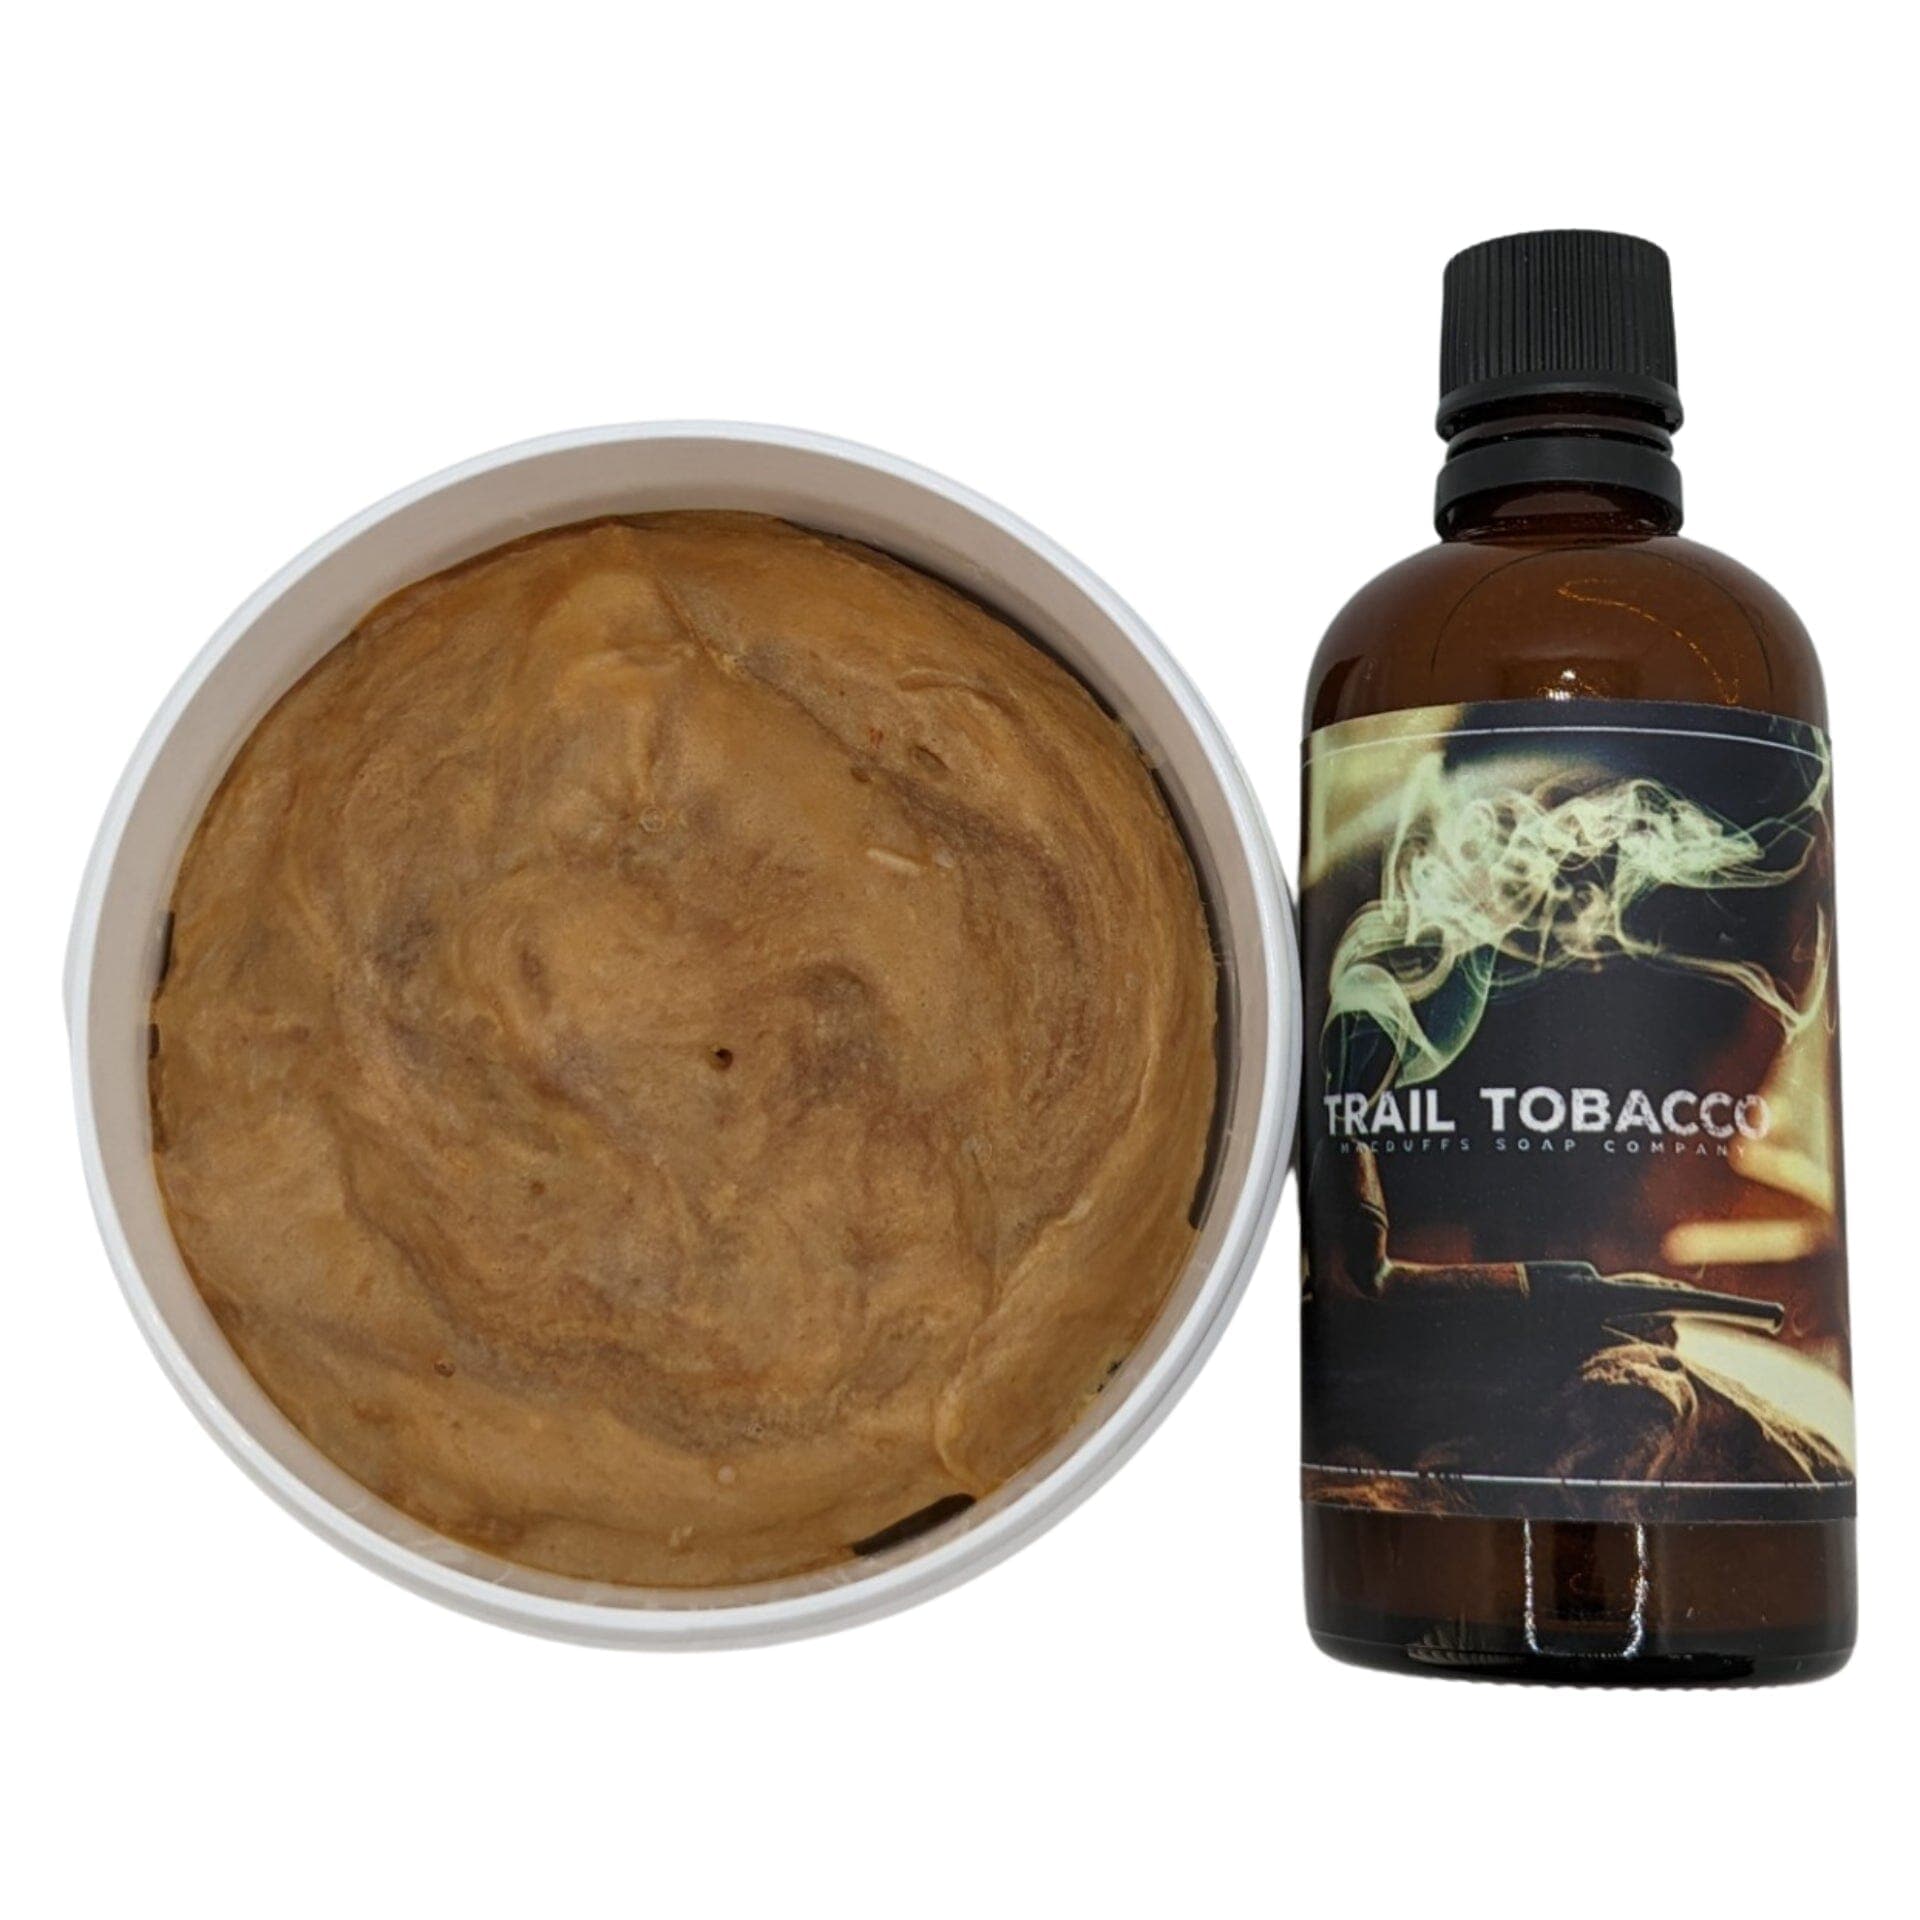 Trail Tobacco Shaving Soap and Splash - by Macduffs Soap Co. (Pre-Owned) Shaving Soap Murphy & McNeil Pre-Owned Shaving 